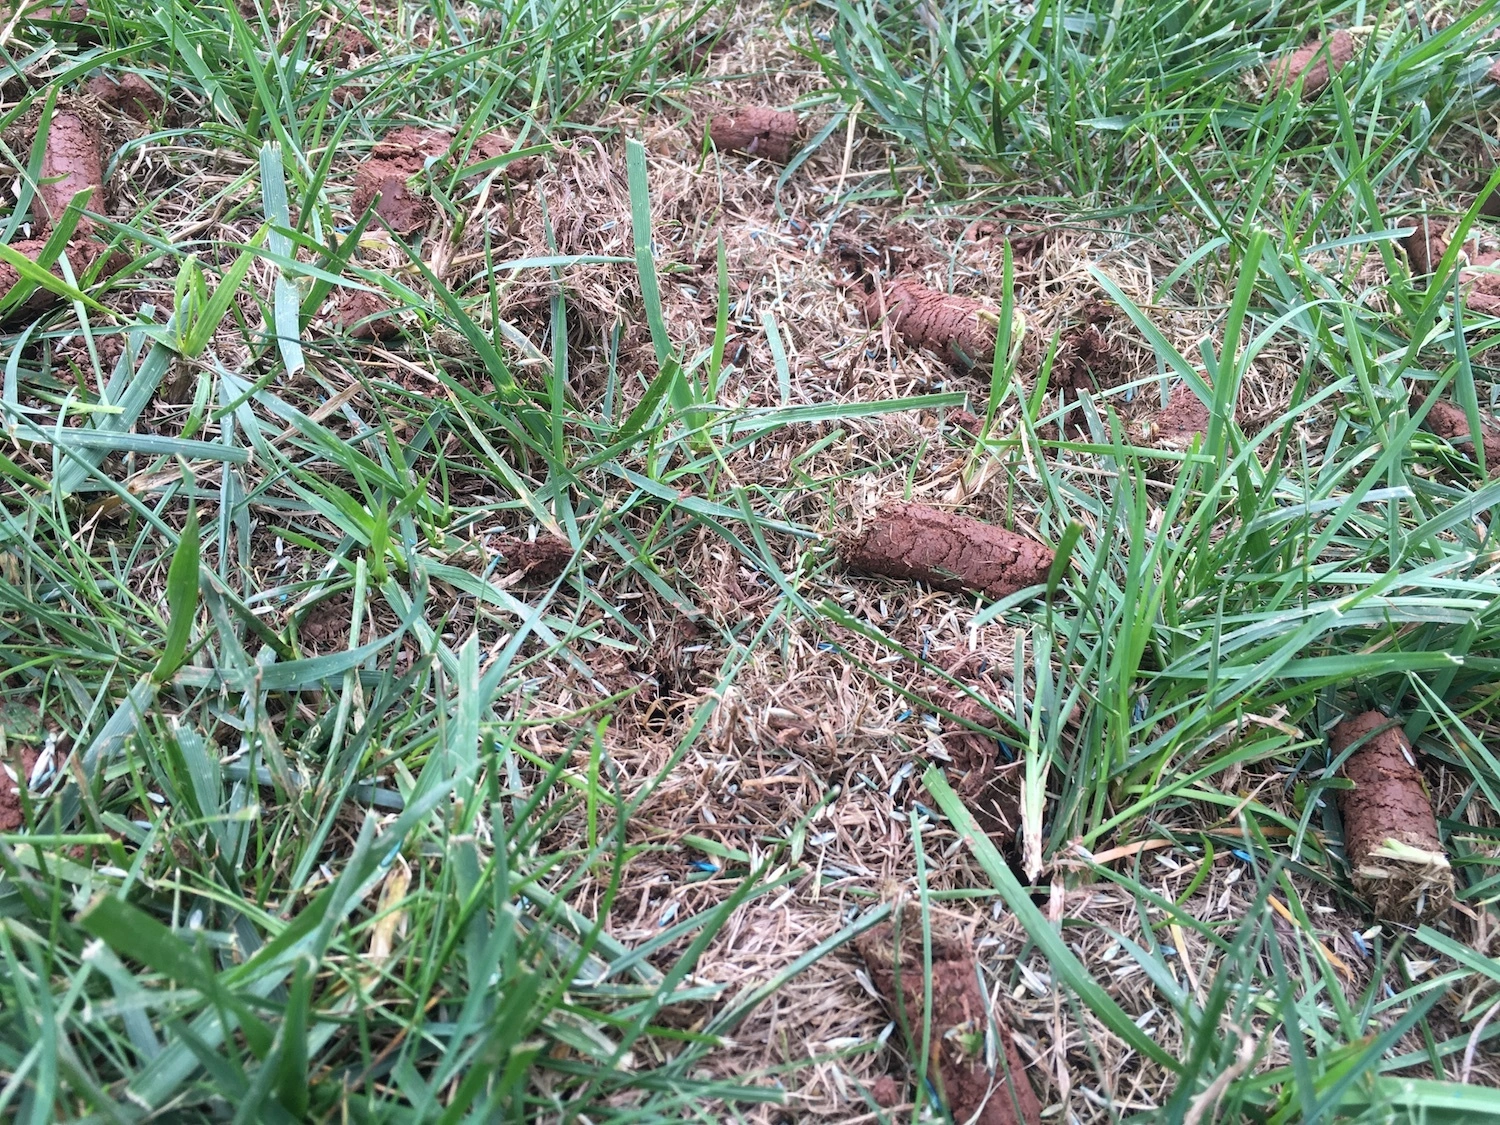 aeration plugs and seed in grass